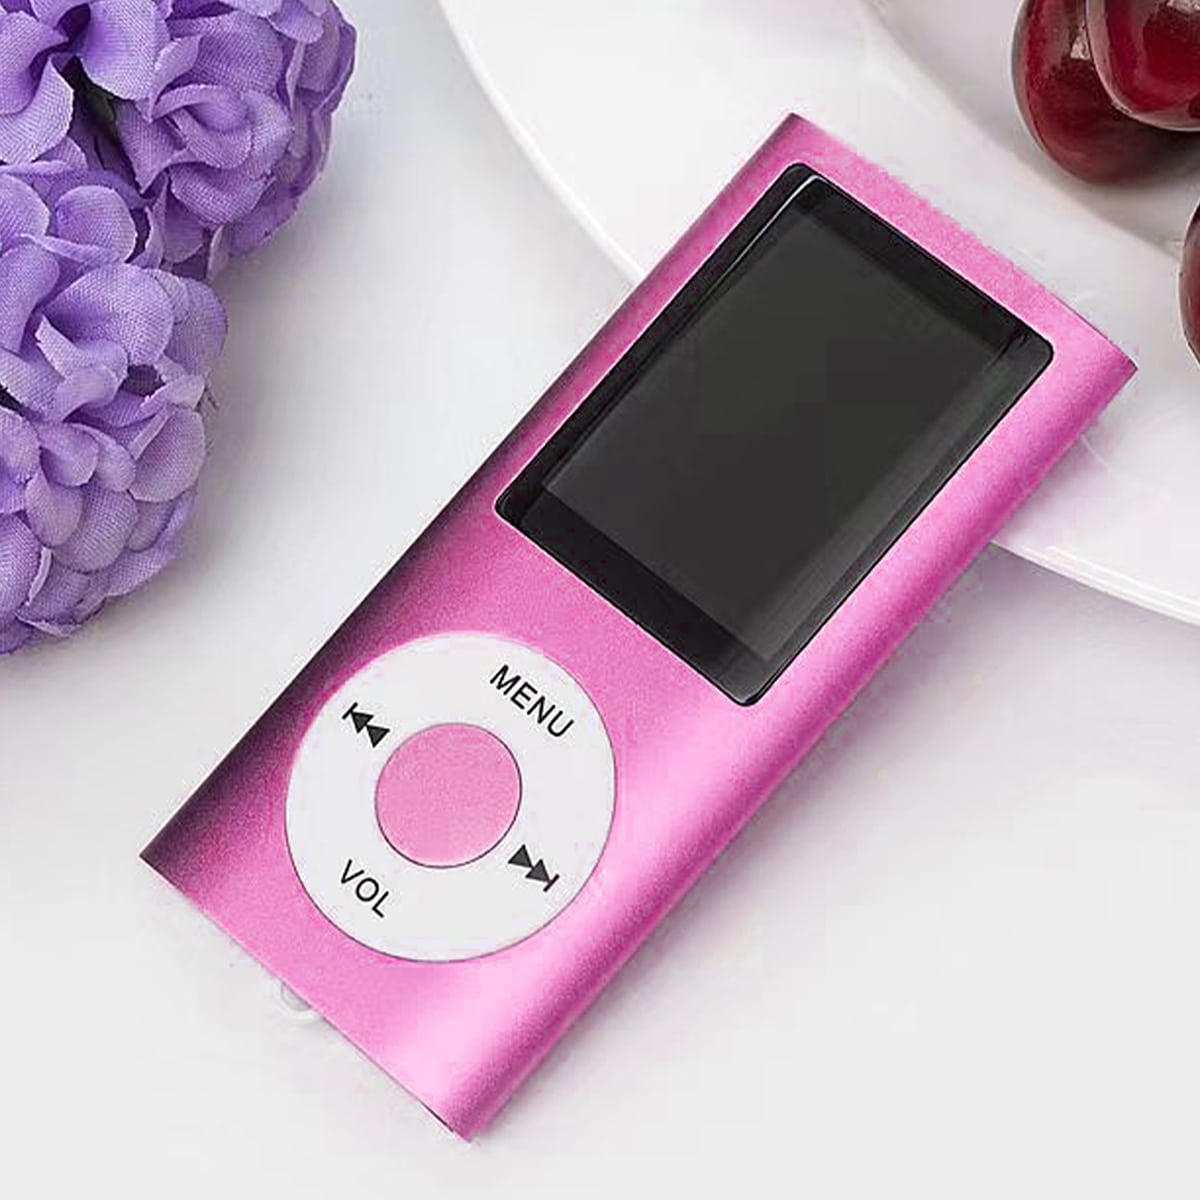 SHEIN Gm10 Portable Mp3/mp4 Player With Maximum Support Of 64gb Memory Card, Stereo Sound, 1.8 Inch Tft Display, Can Be Used As Fm Radio, Voice Recorder, Supports Amv Format Hot Pink